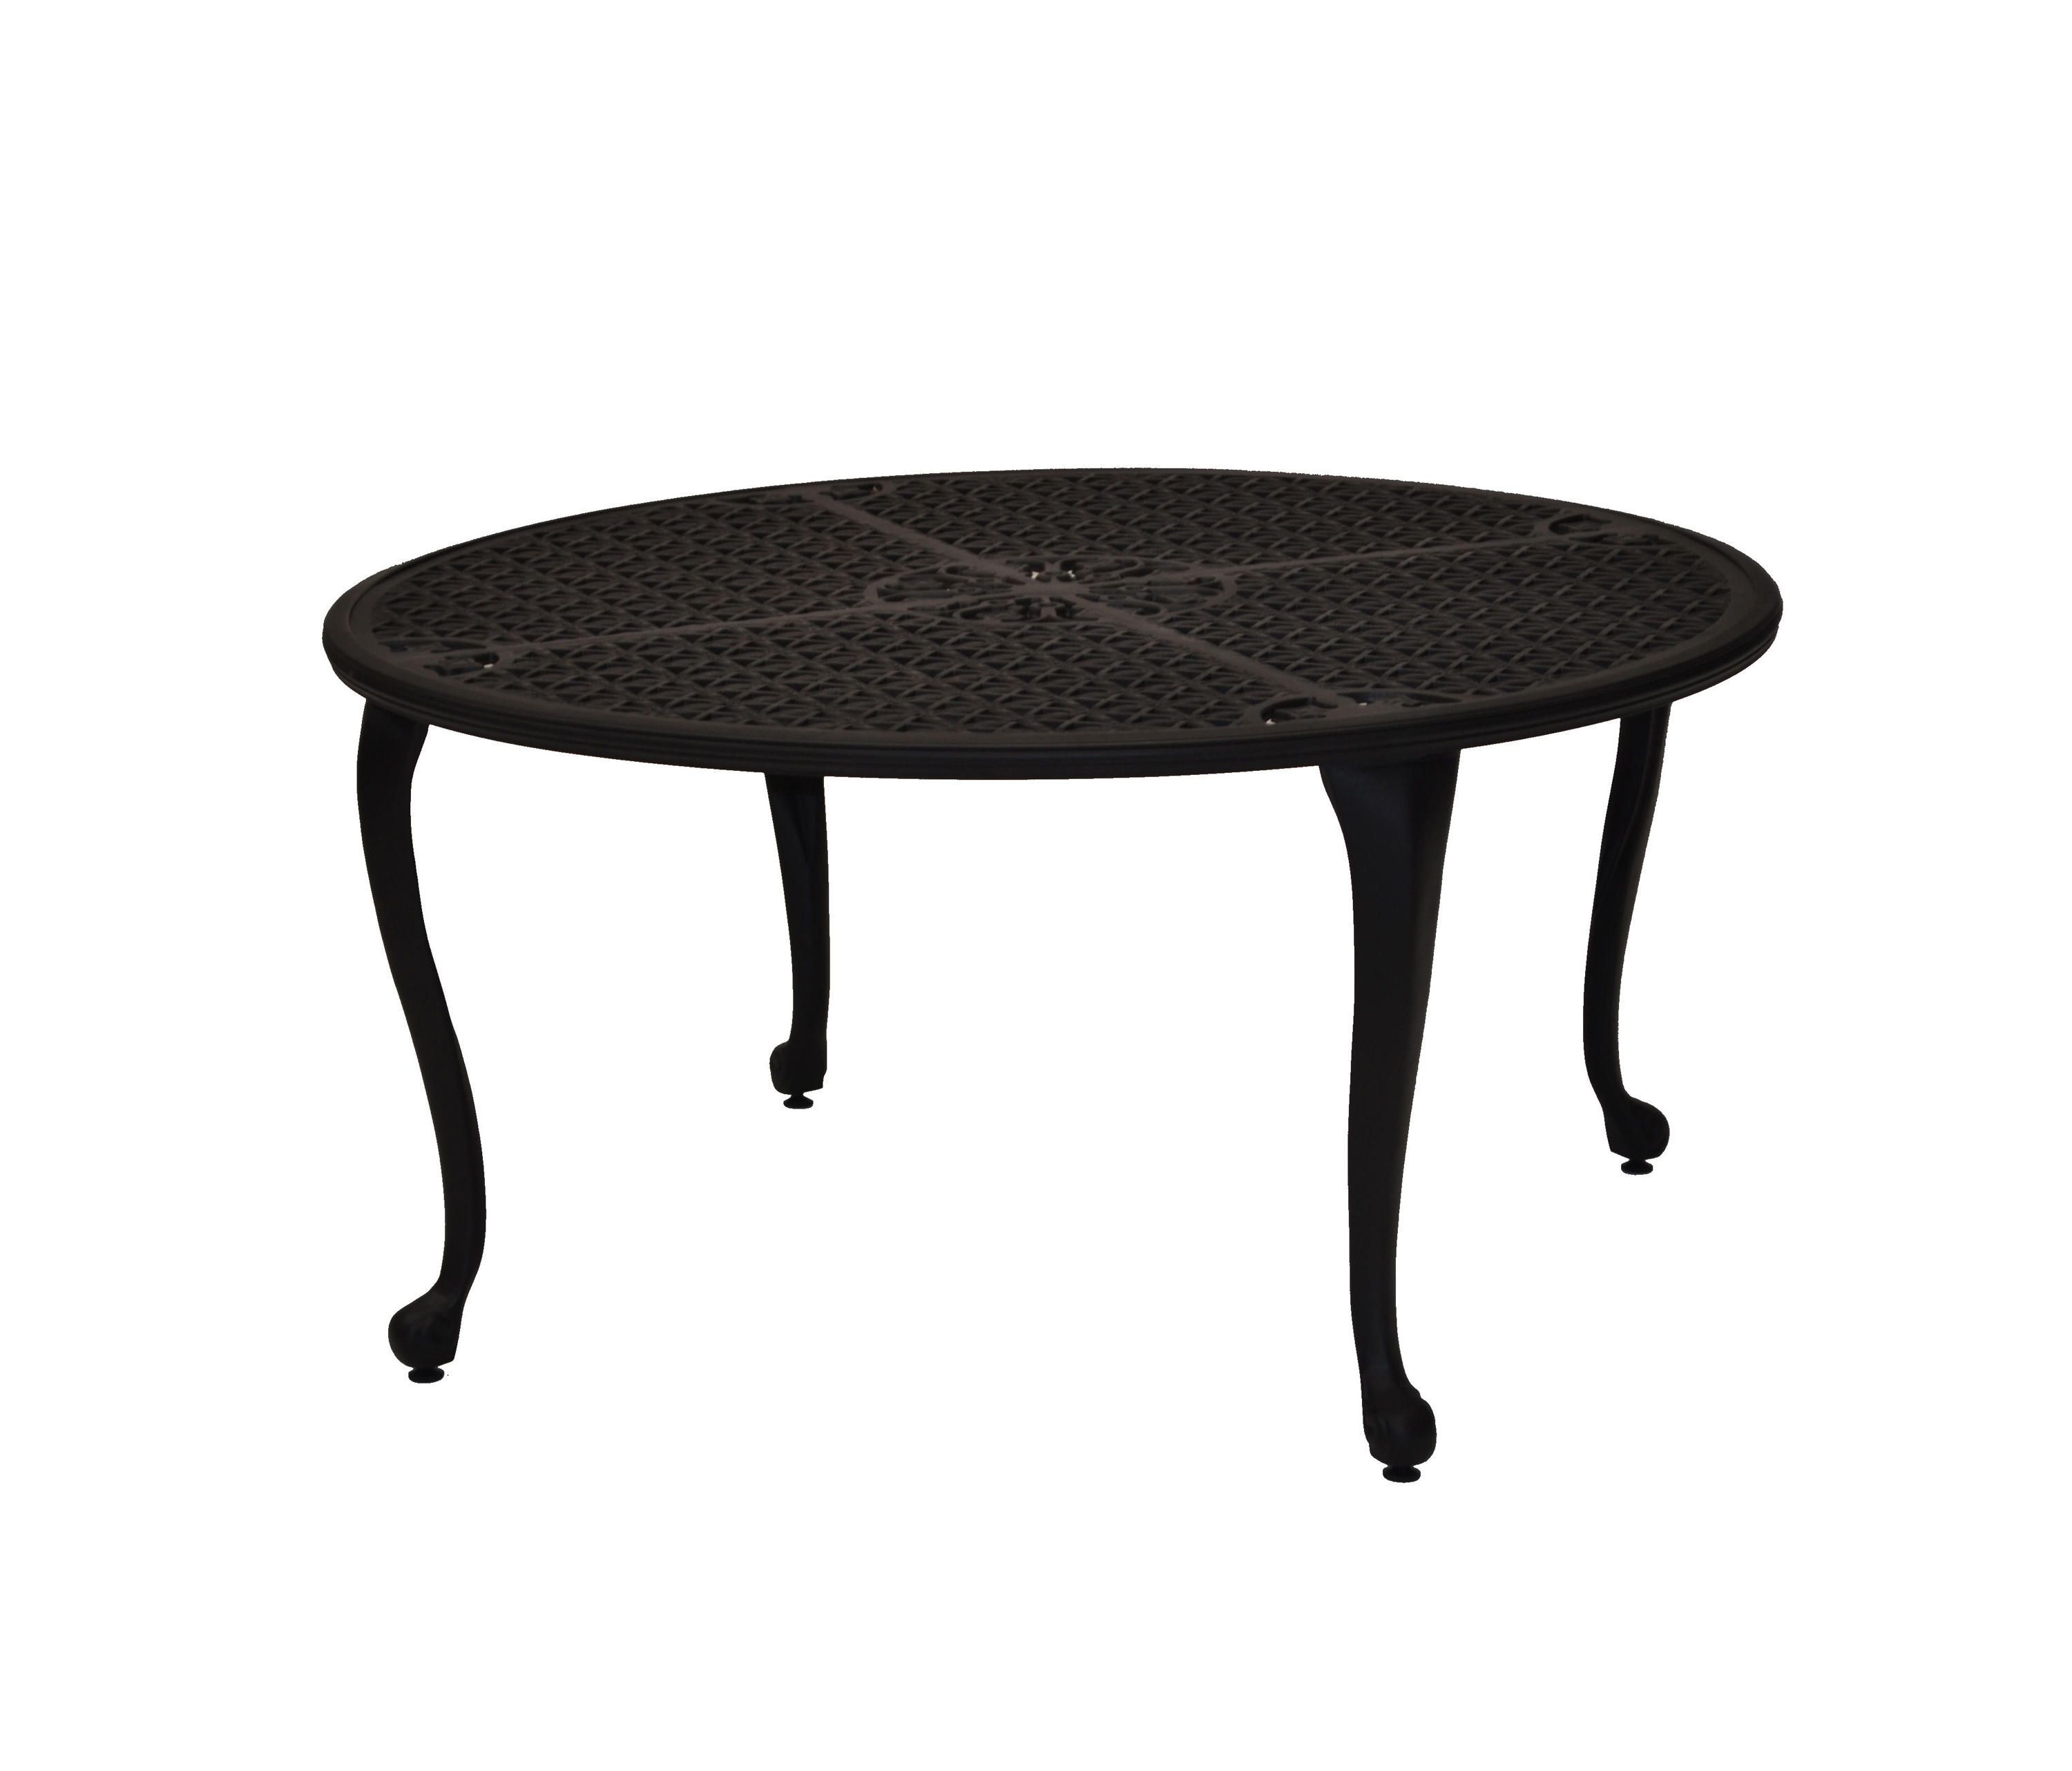 Fashionable Bordeaux Dining Tables For Bordeaux Round Table – Dining Tables From Oxley's Furniture (View 10 of 25)